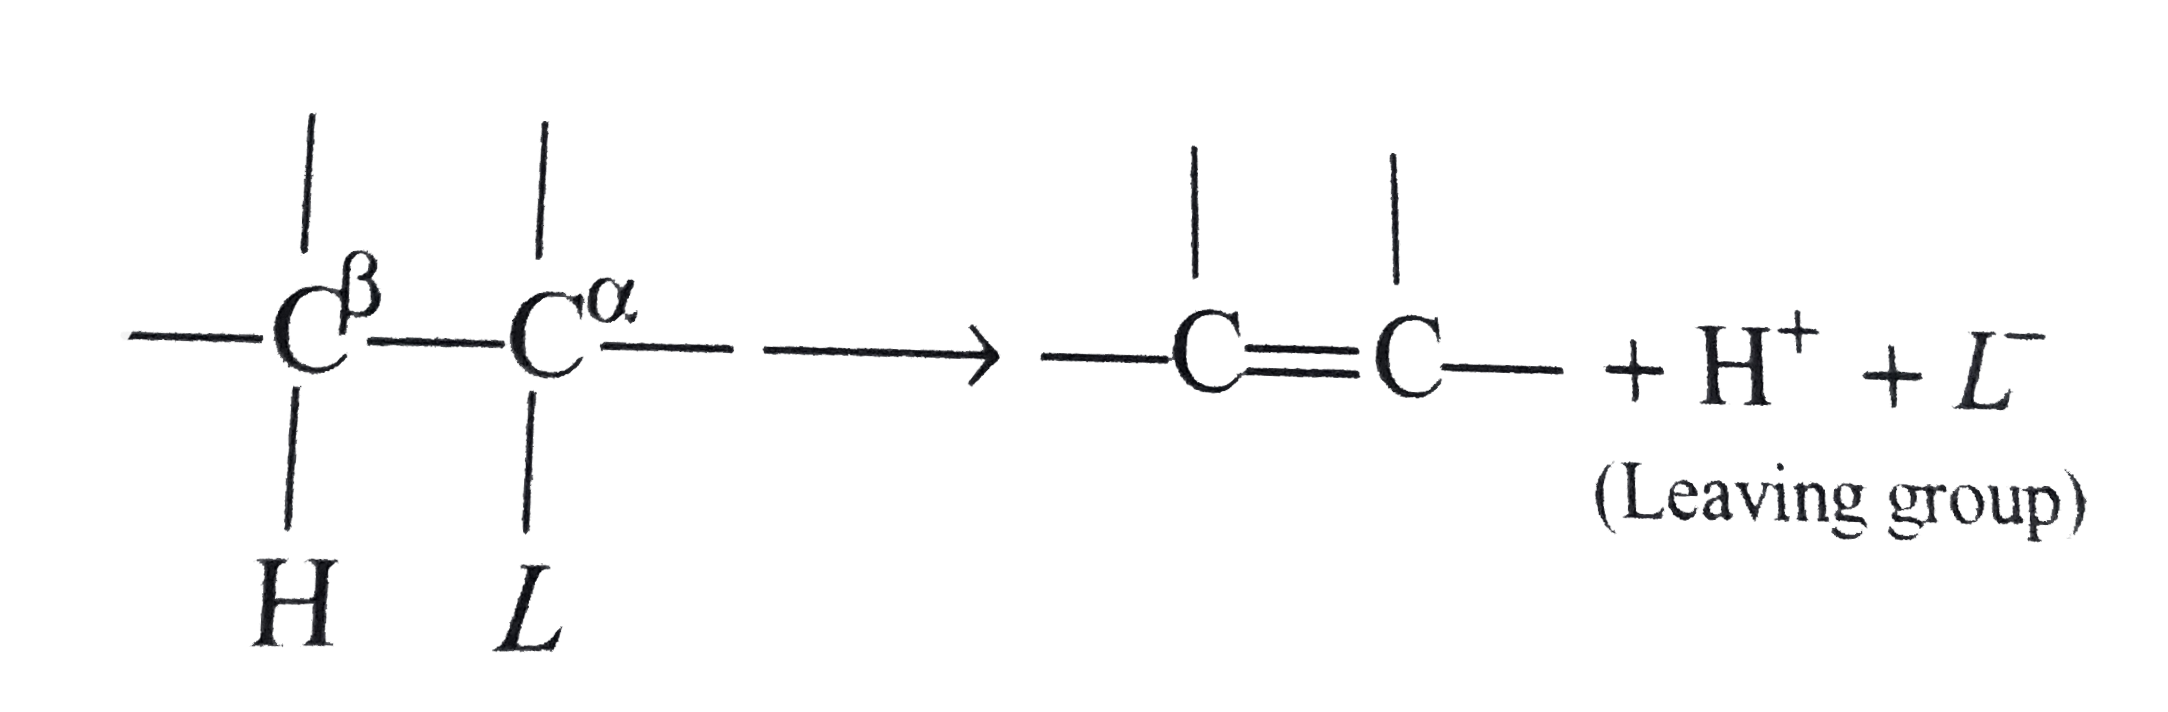 The removal of two atoms or groups one generally hydrogen (H^(+)) and the other a leaving group (L^(-)) resulting in the formation of unsaturated compound is known as elimination reaction.      In E(1) (elimination) reactions the C-L bond is broken heterolytically (in step 1) to form a carbocation (